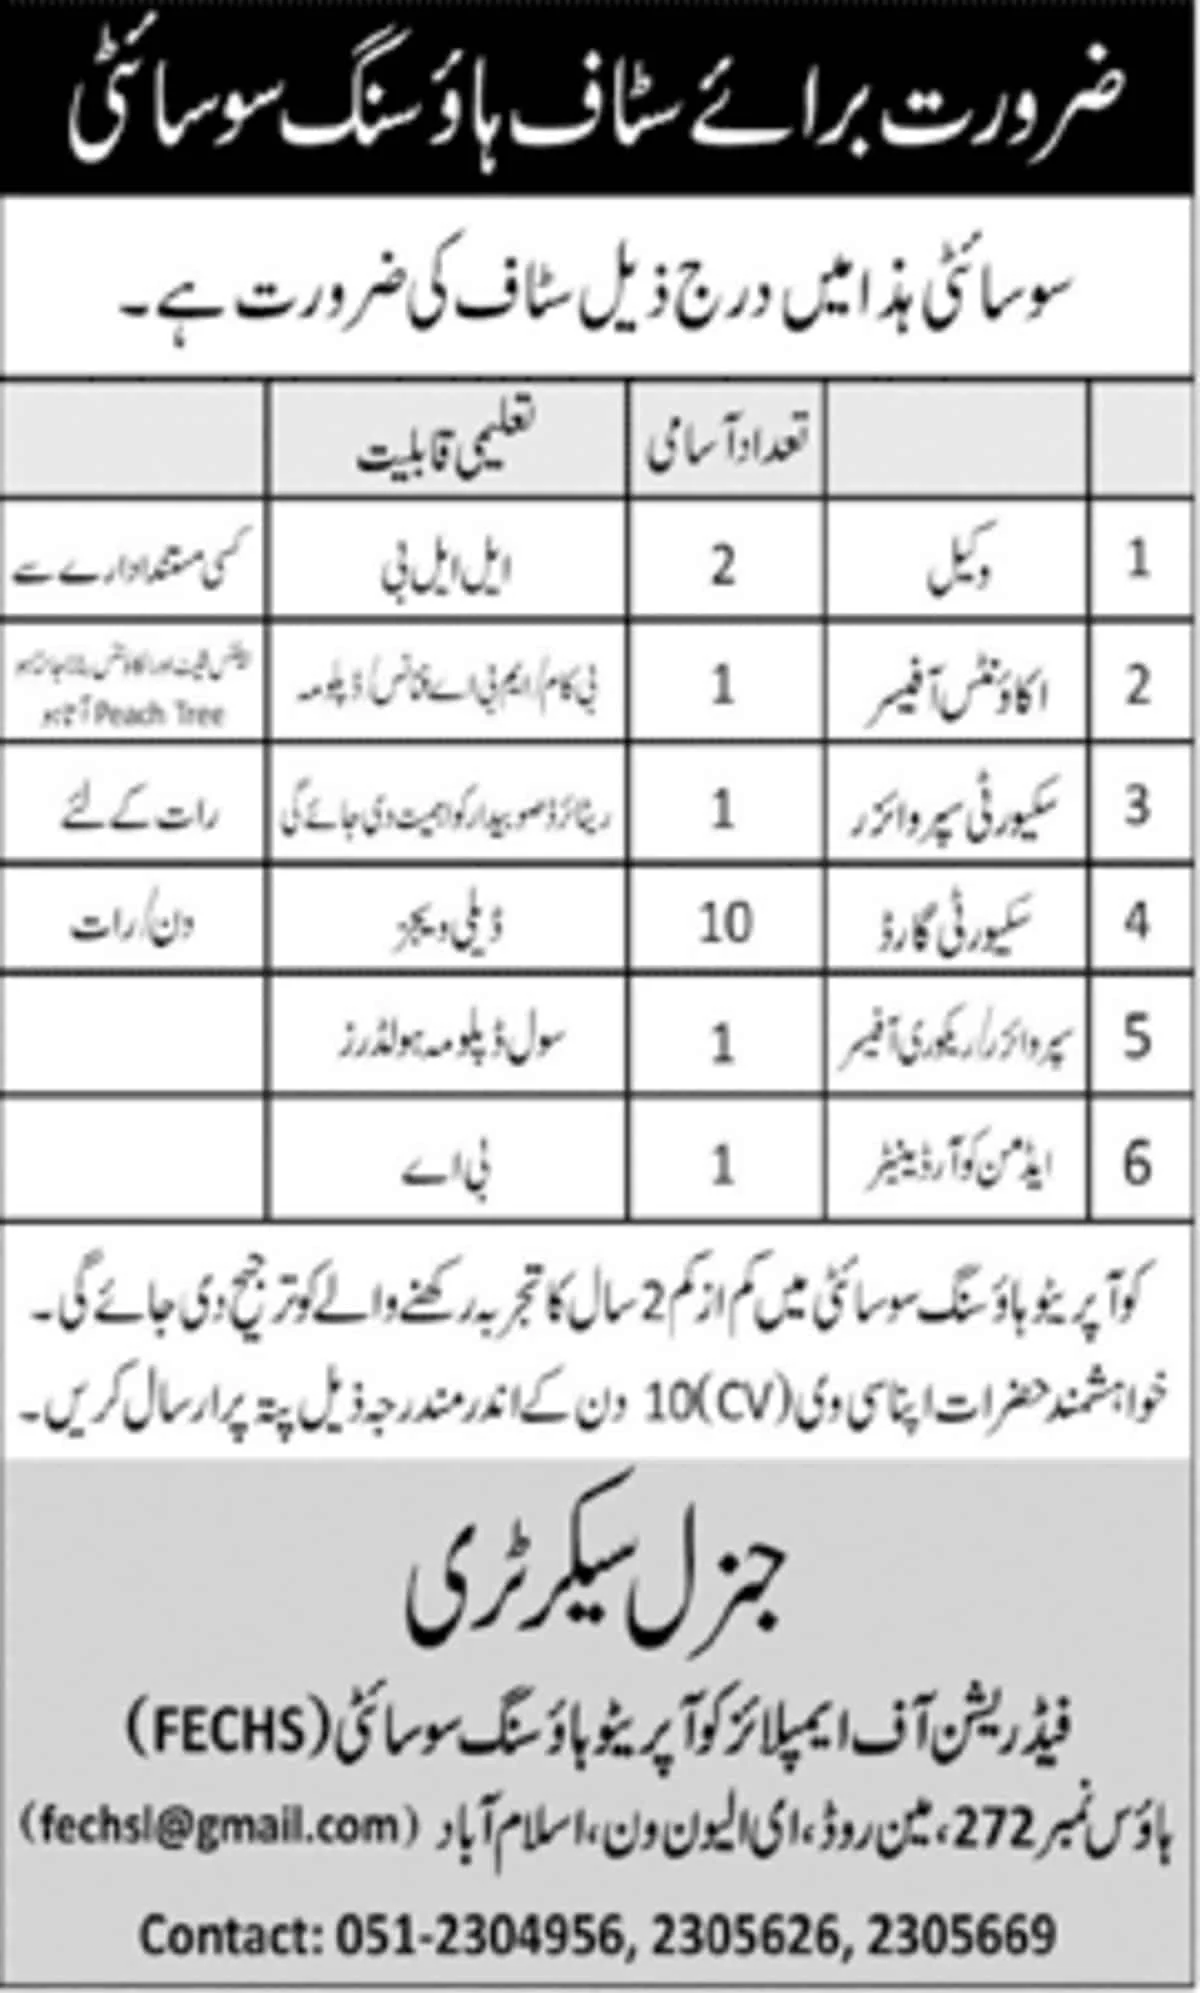 Federation of Employees Cooperative Housing Society FECHS Jobs April 2020